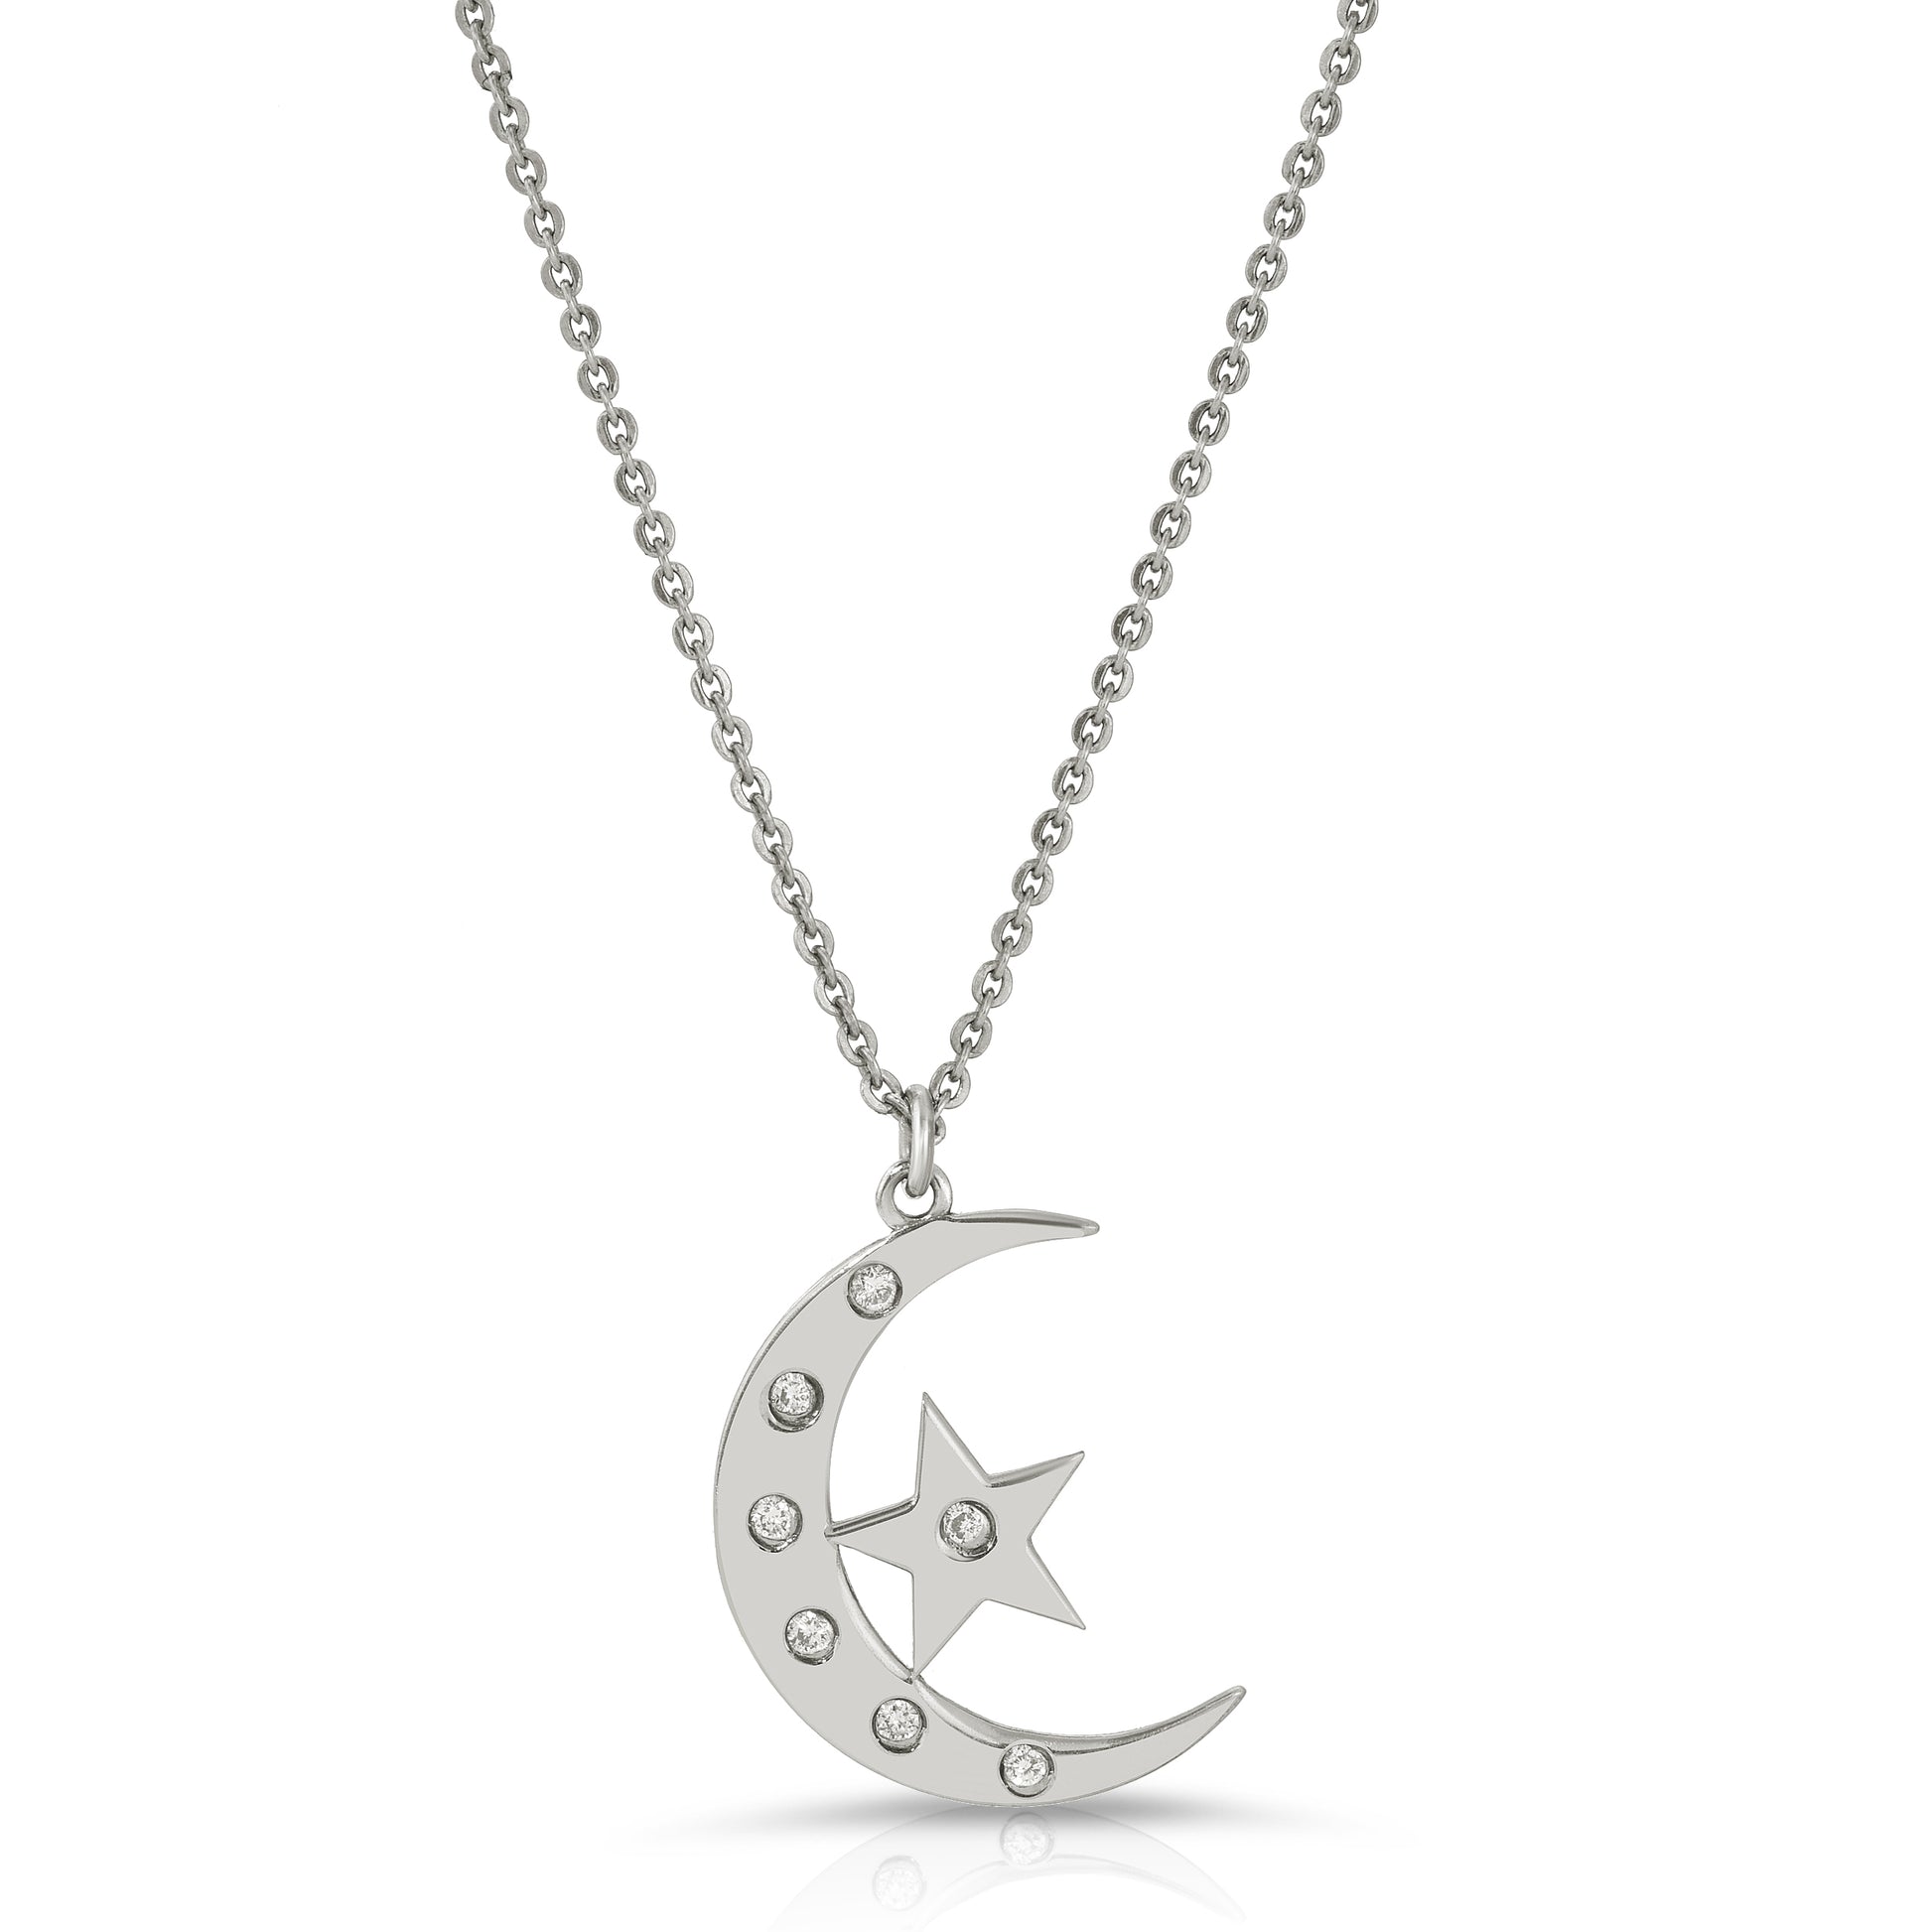 18K solid gold Moon and Star Pendant necklace with 7 diamonds from the wandering jewel